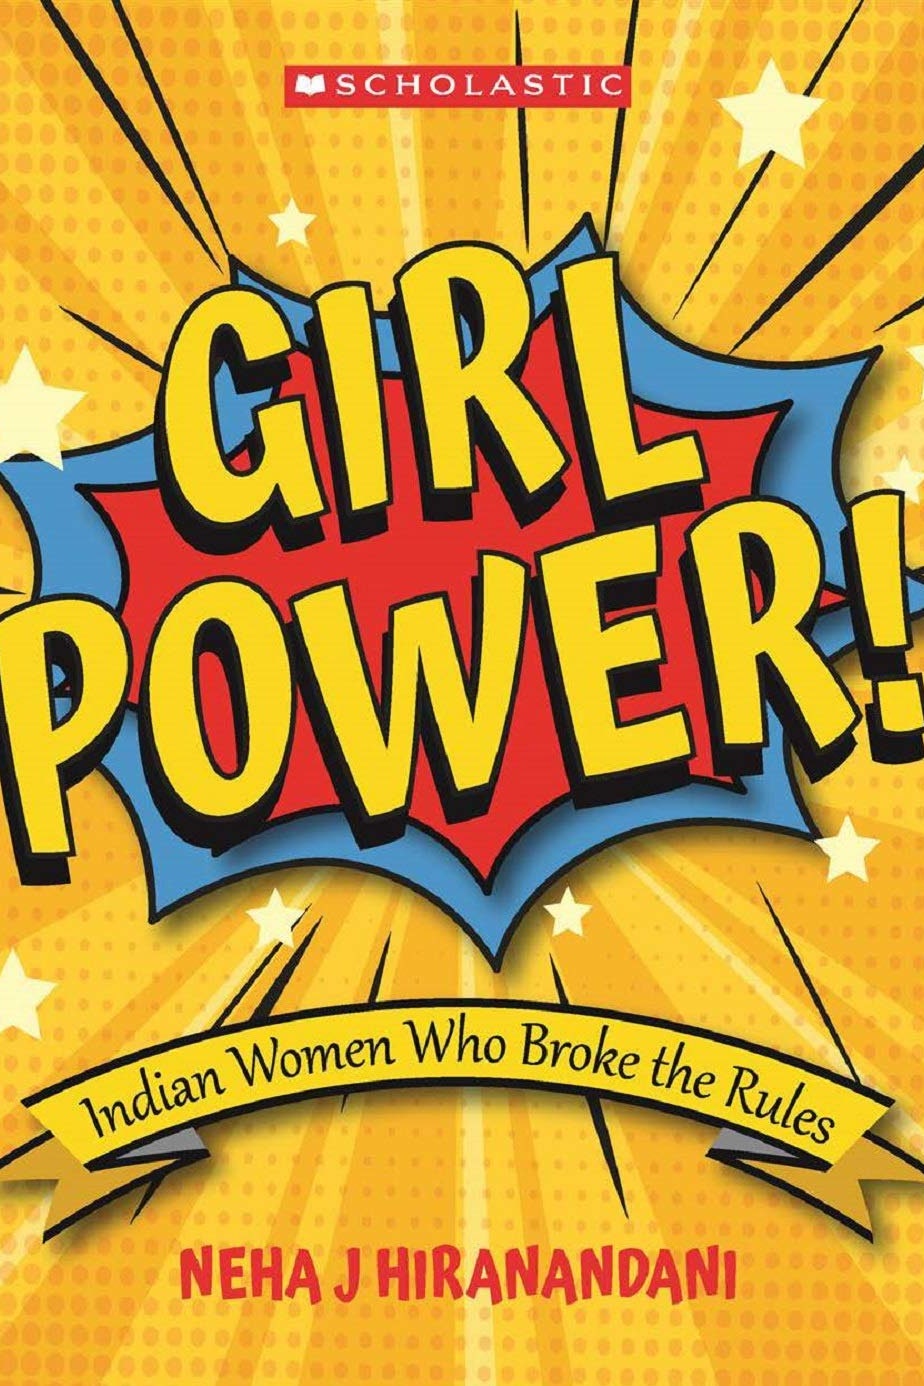 Frontlist | This new children's book celebrates India's female rule-breakers and their untold stories